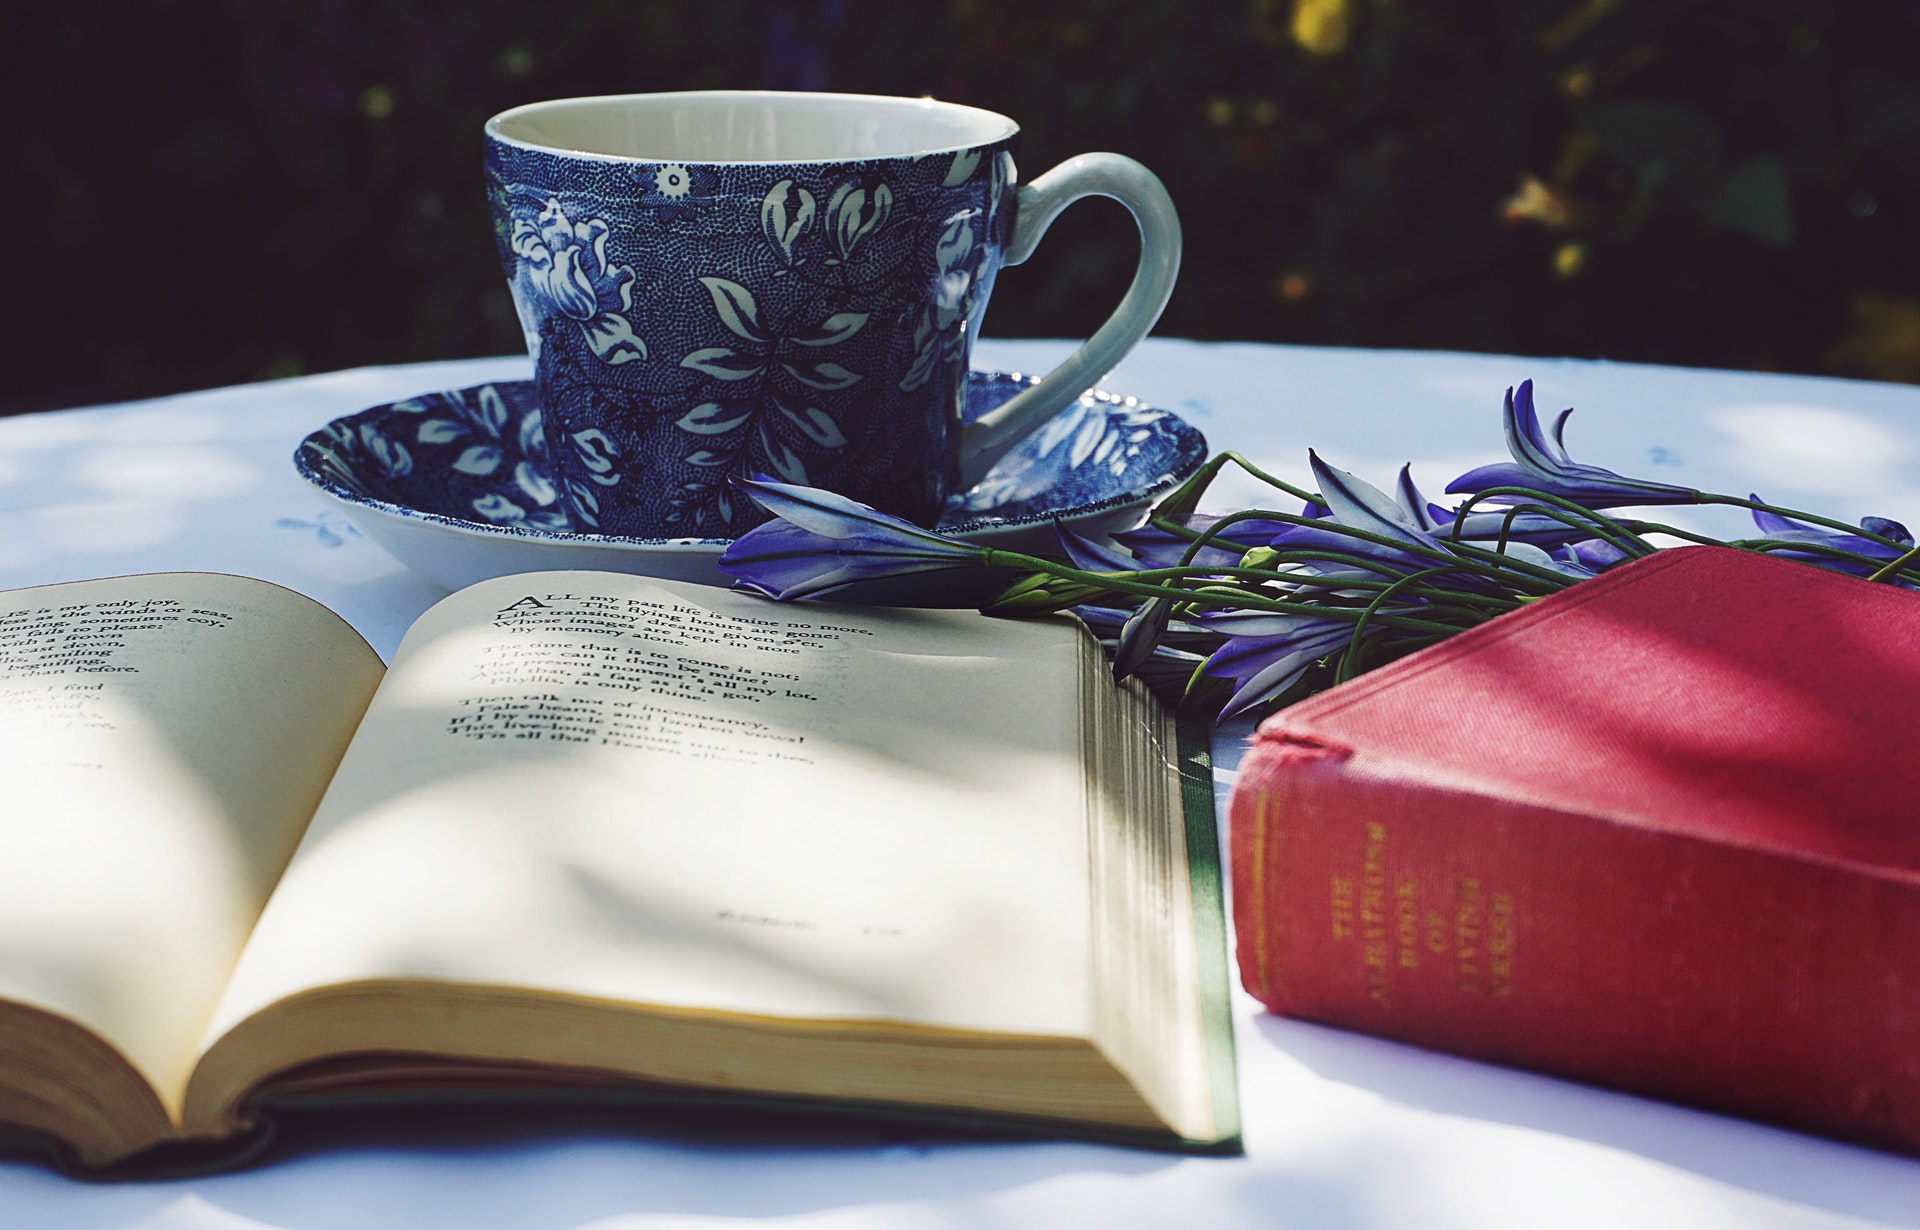 a cup and saucer next to a book